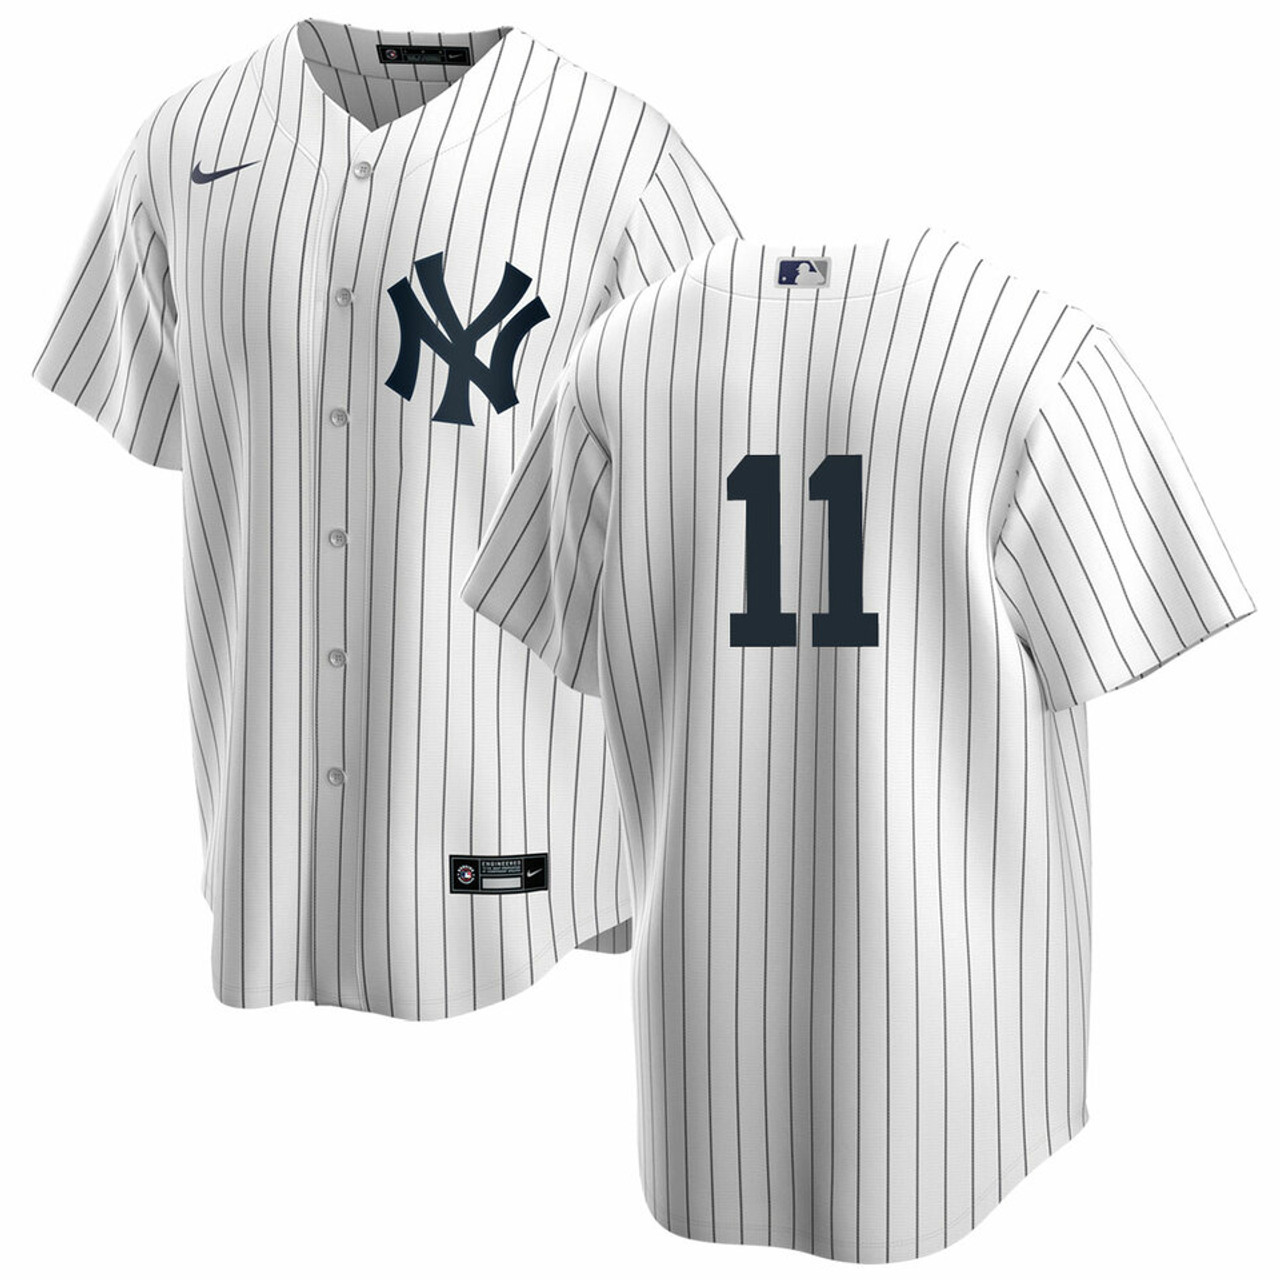 Youth Baseball Replica Jersey - Customized Number #Replica-BB-Y-S0001